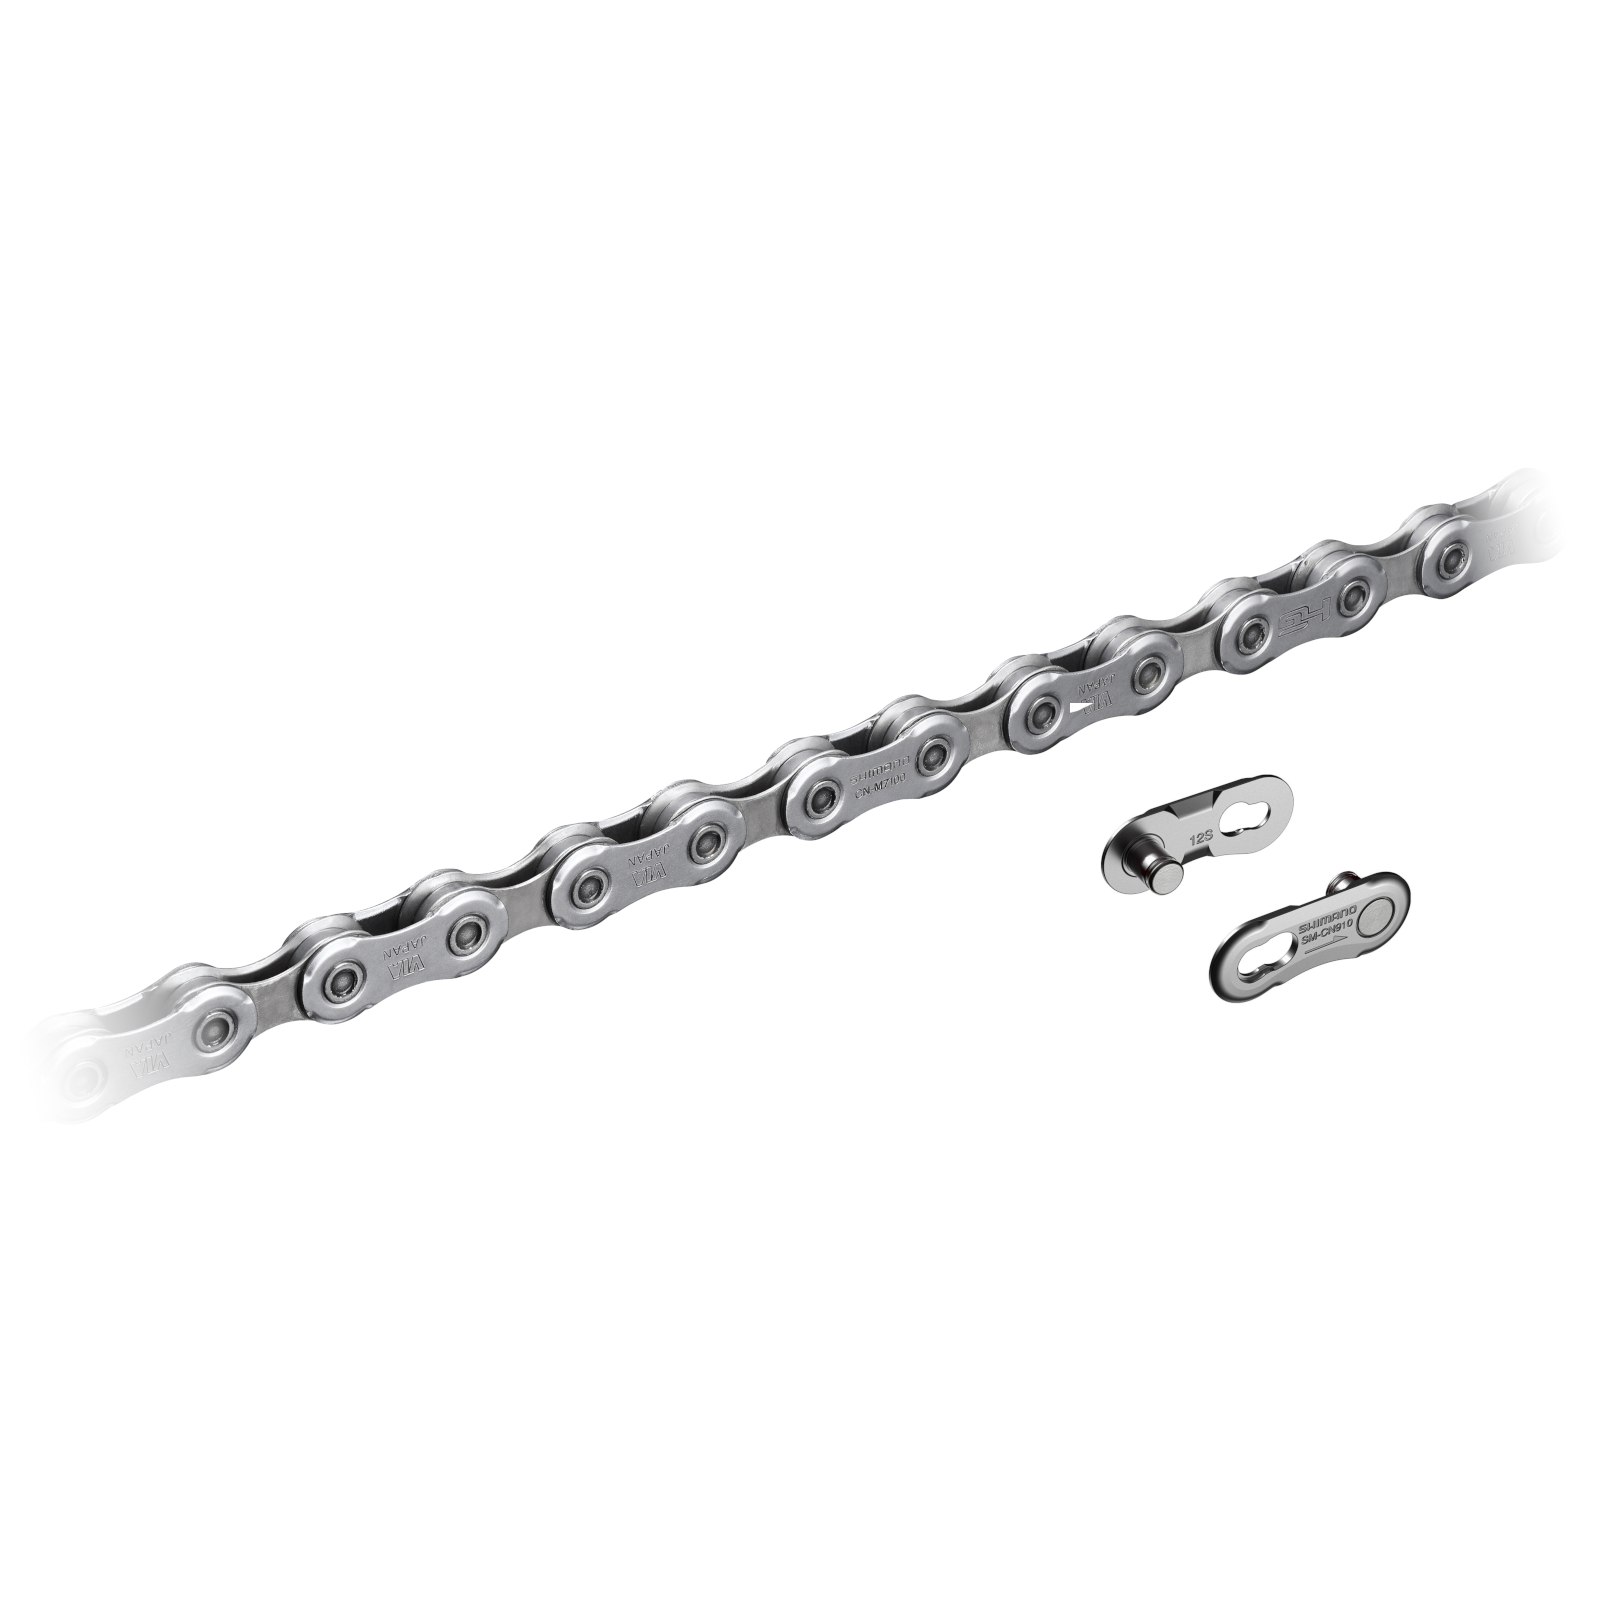 Picture of Shimano SLX CN-M7100 Chain 12-speed - with Quick Link